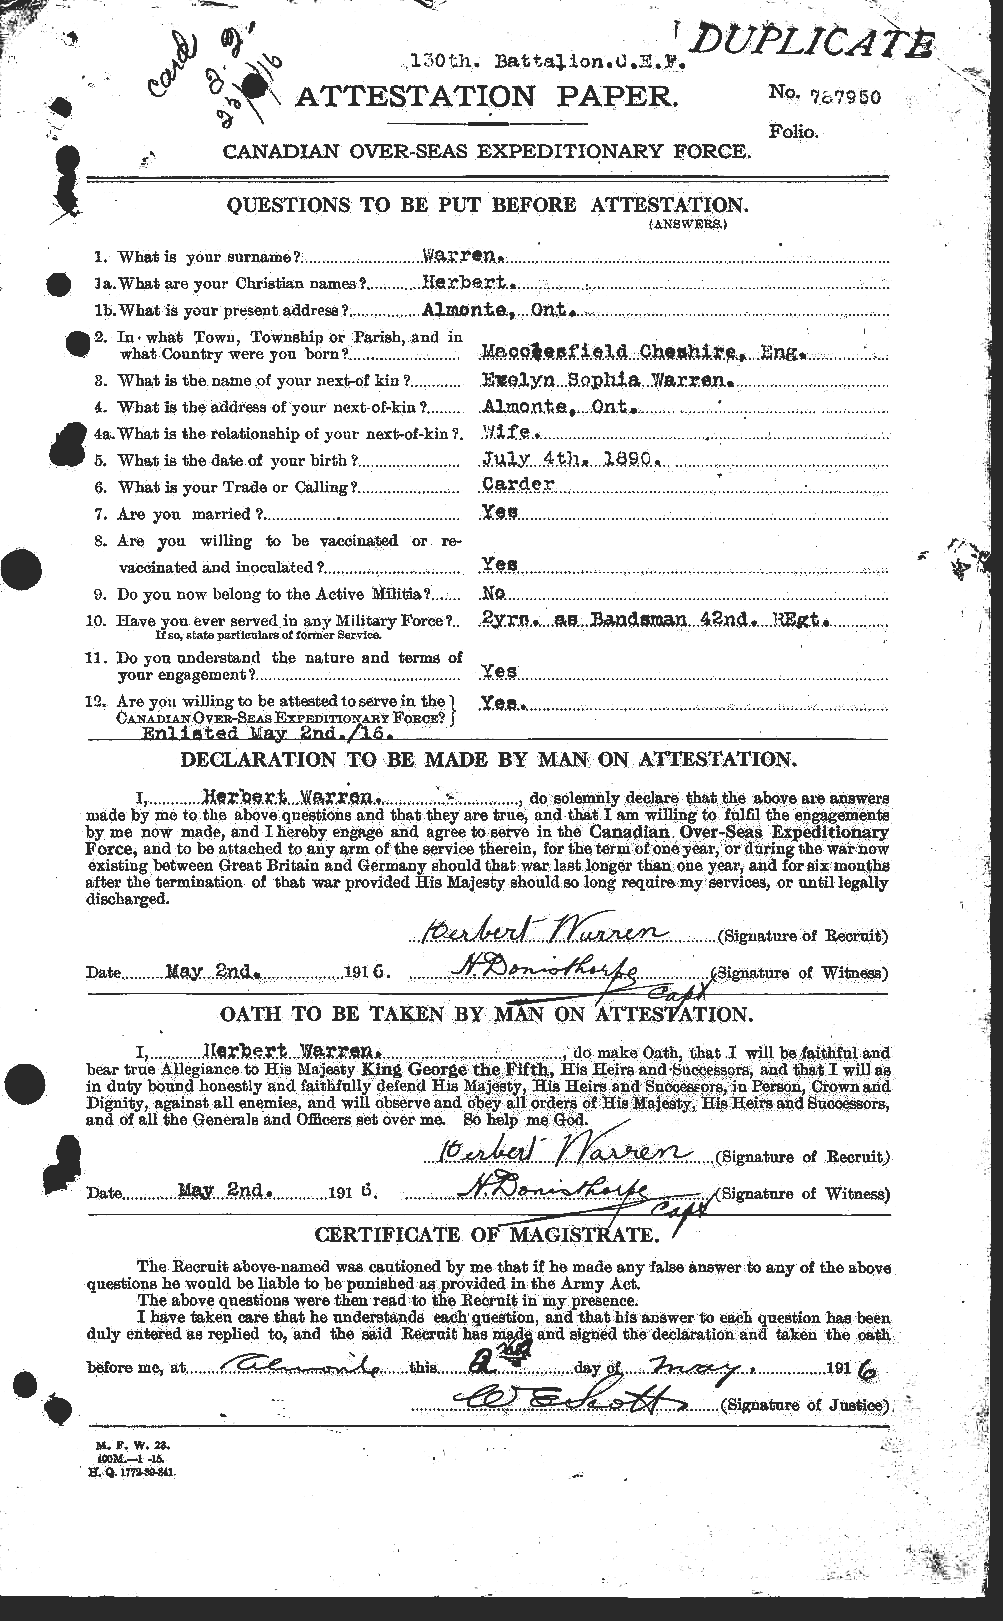 Personnel Records of the First World War - CEF 658498a